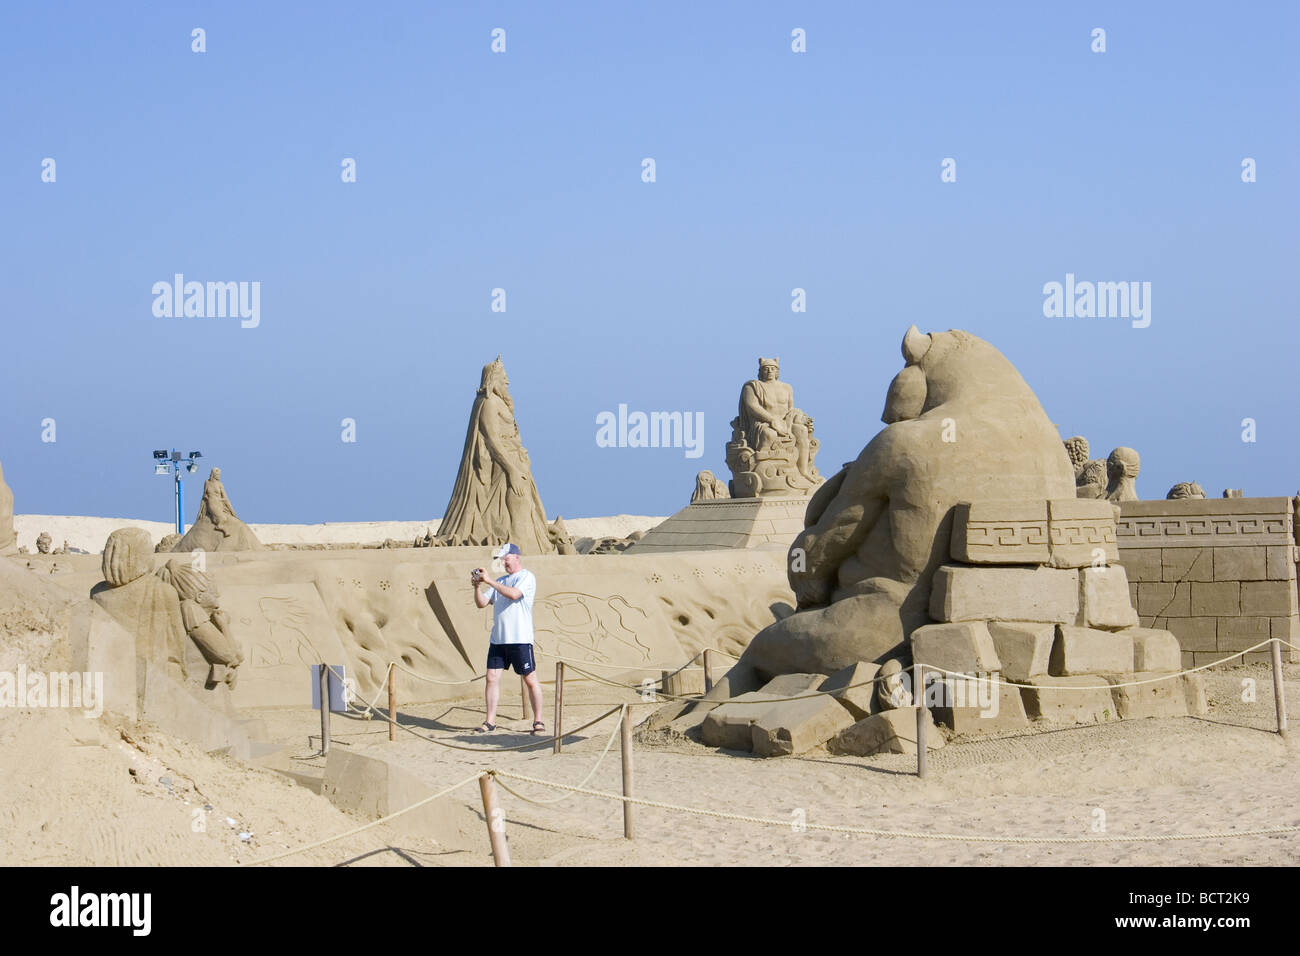 Sand sculpture exhibition, themed on ancient Greek mythology, at Great ...